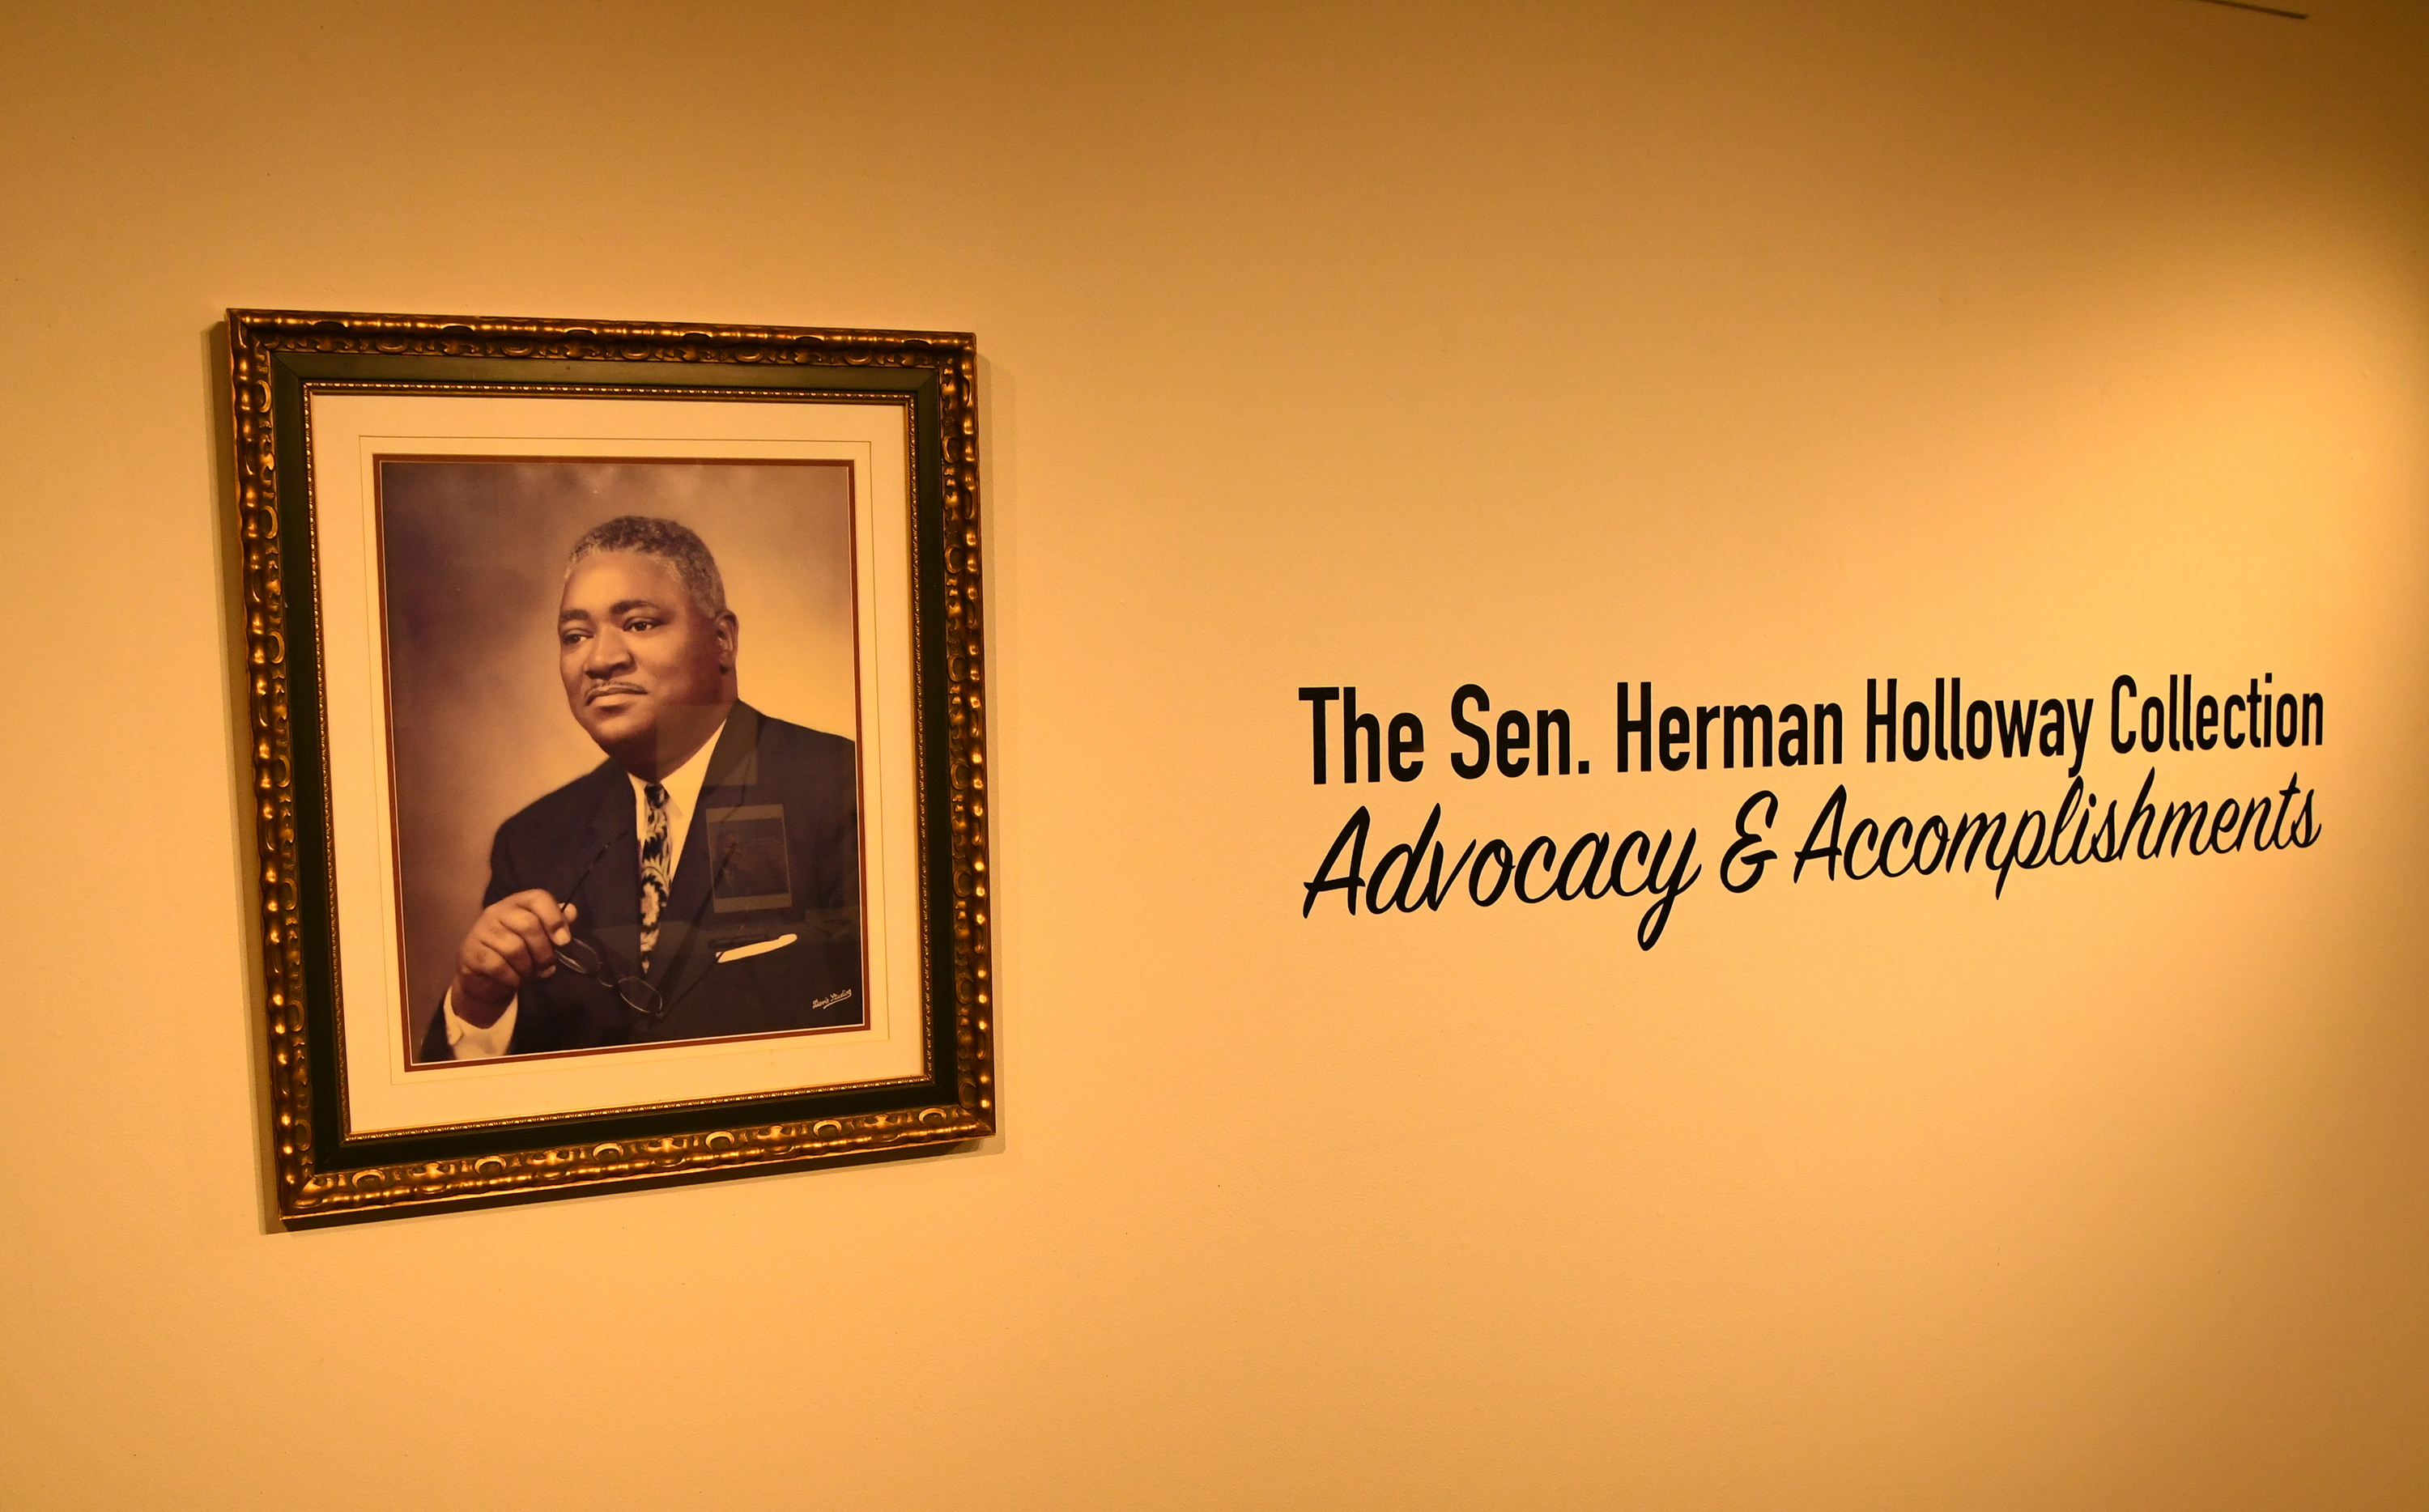 The Herman Holloway Collection will be on exhibition  from Sept. 11-22.